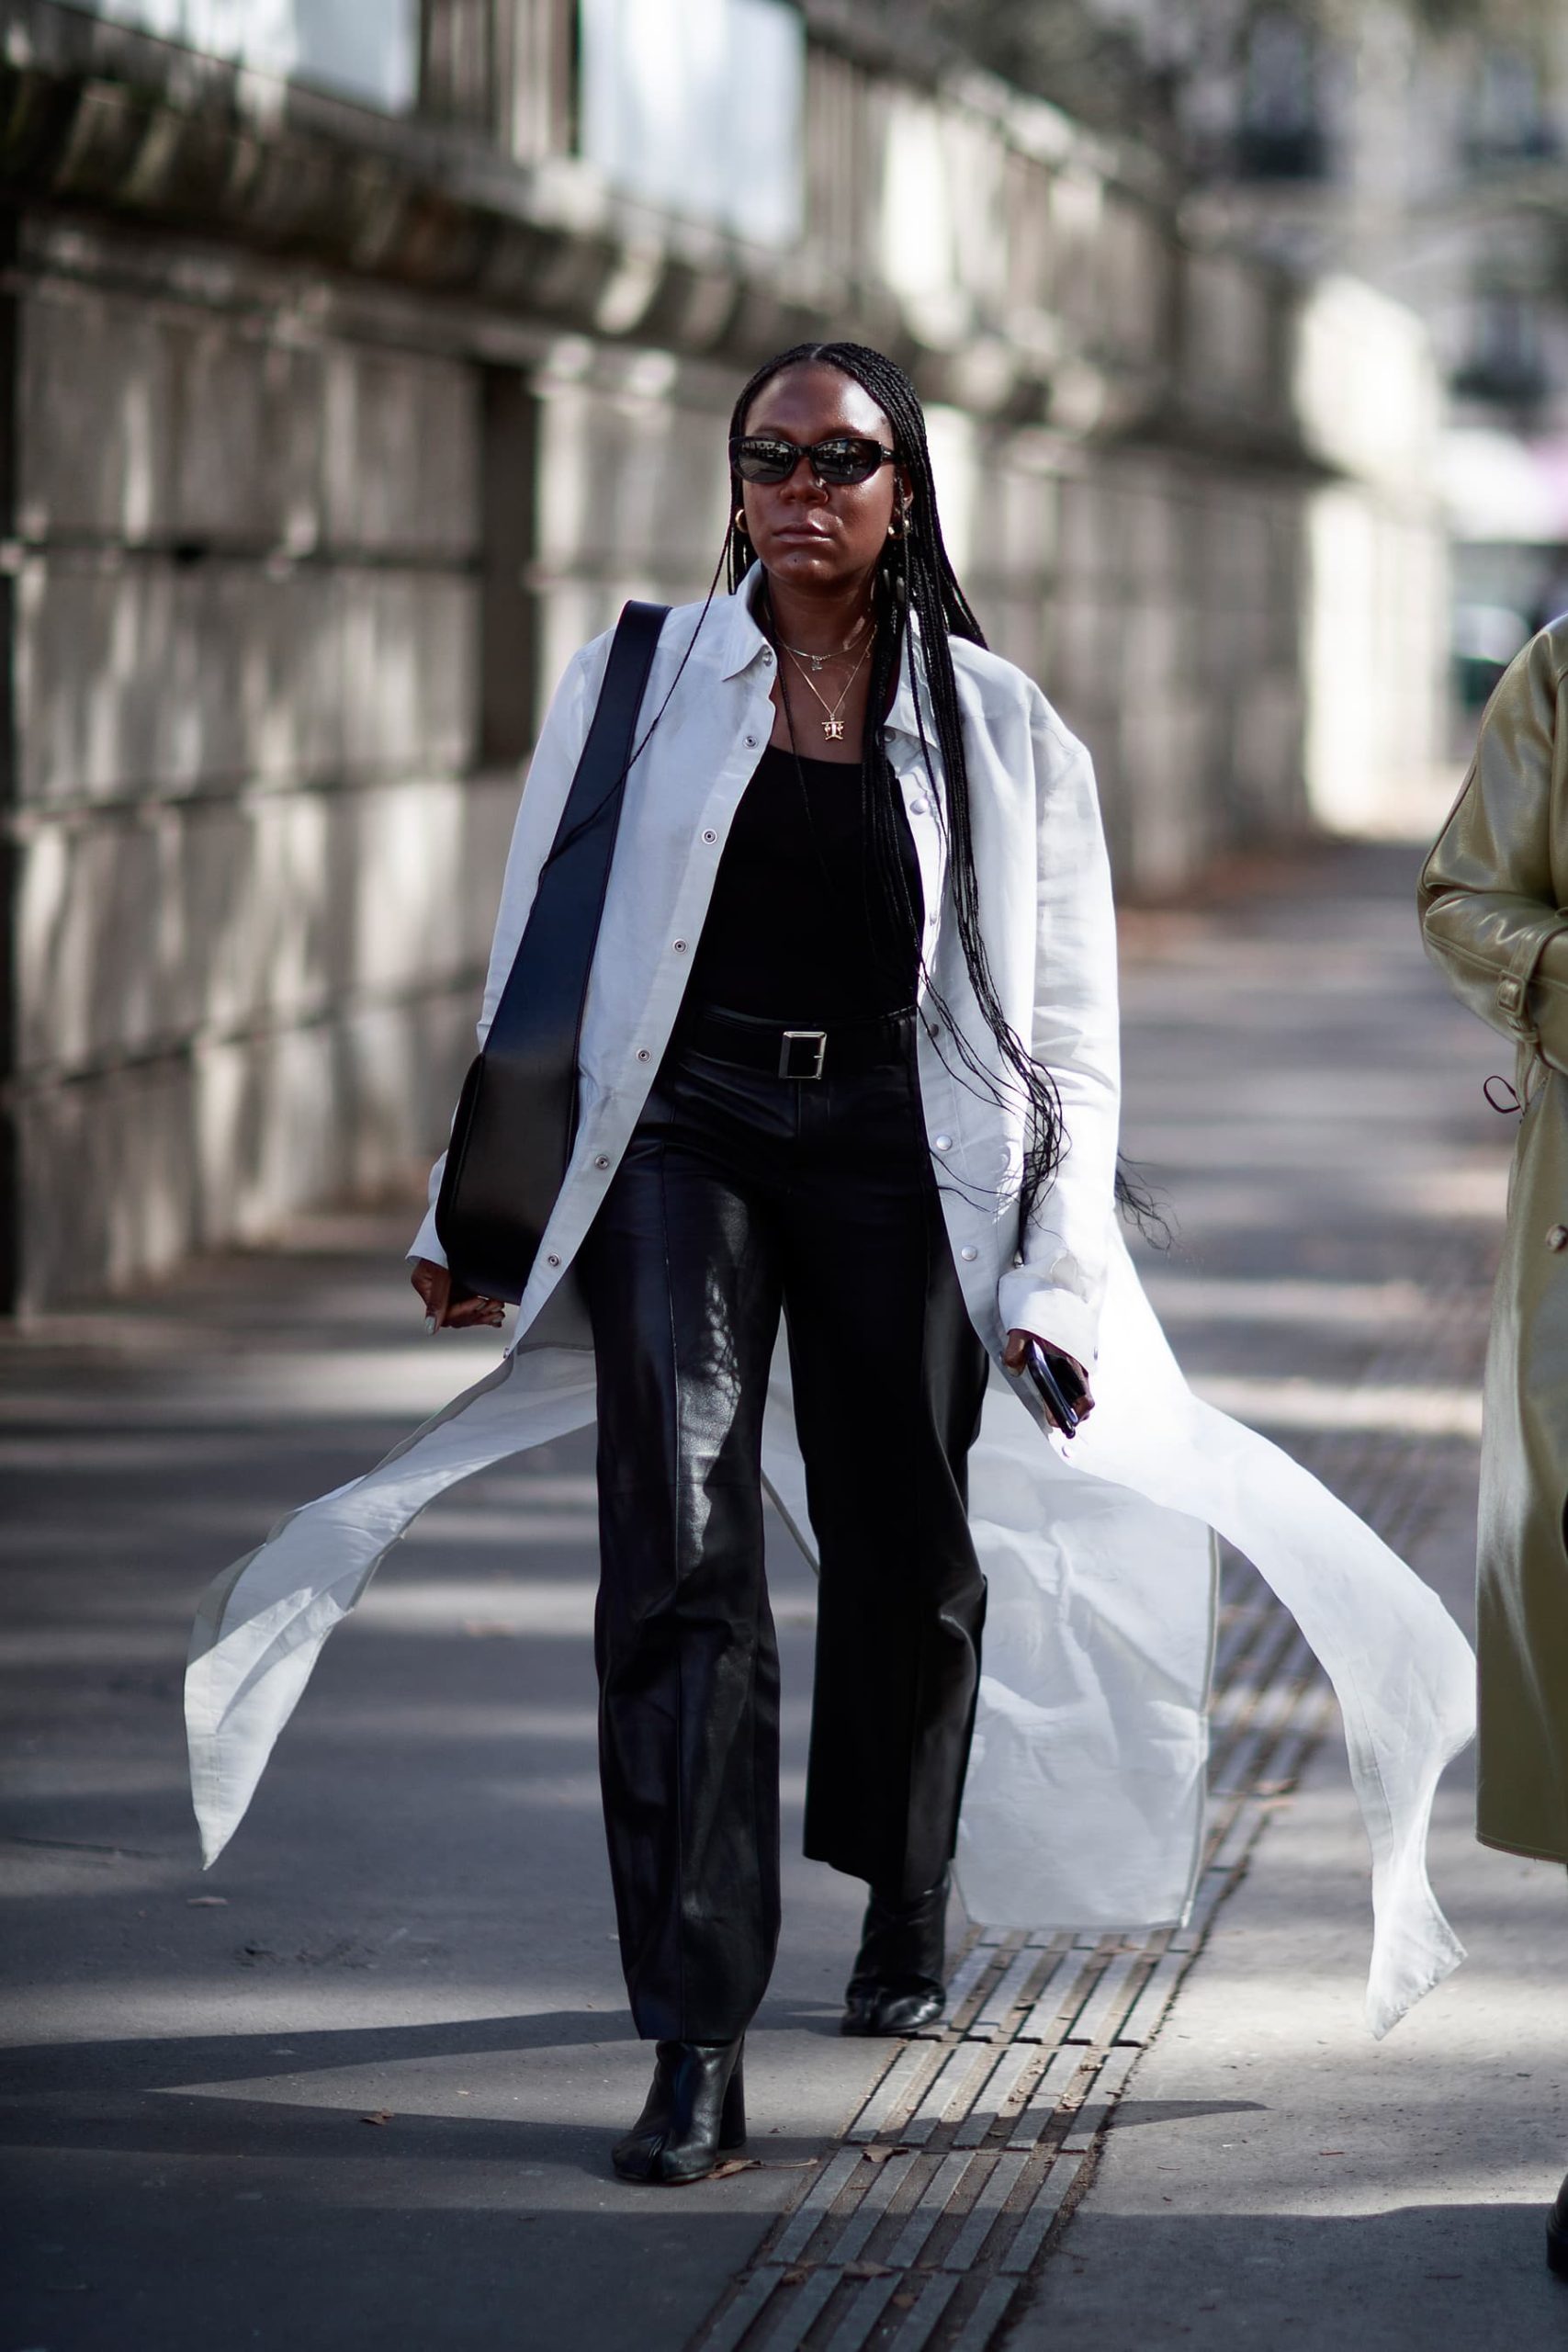 Top Up & Coming Street Style Fashion Influencers for Spring 2022